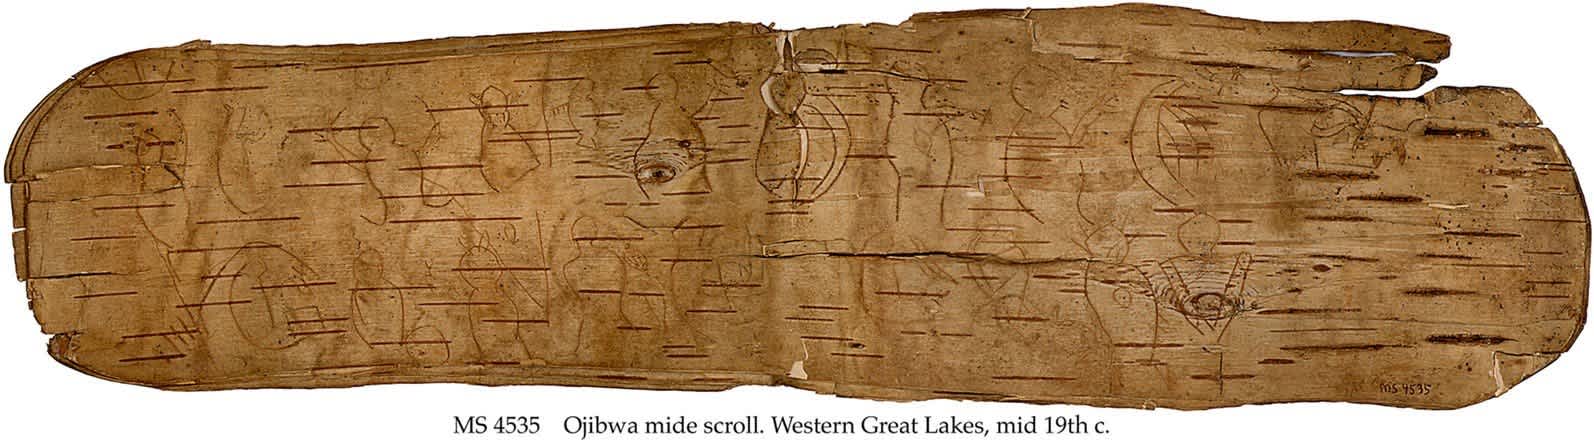 Ojibwe Mide Scroll Western Great Lakes, mid 19th century from The Schoyen Collection